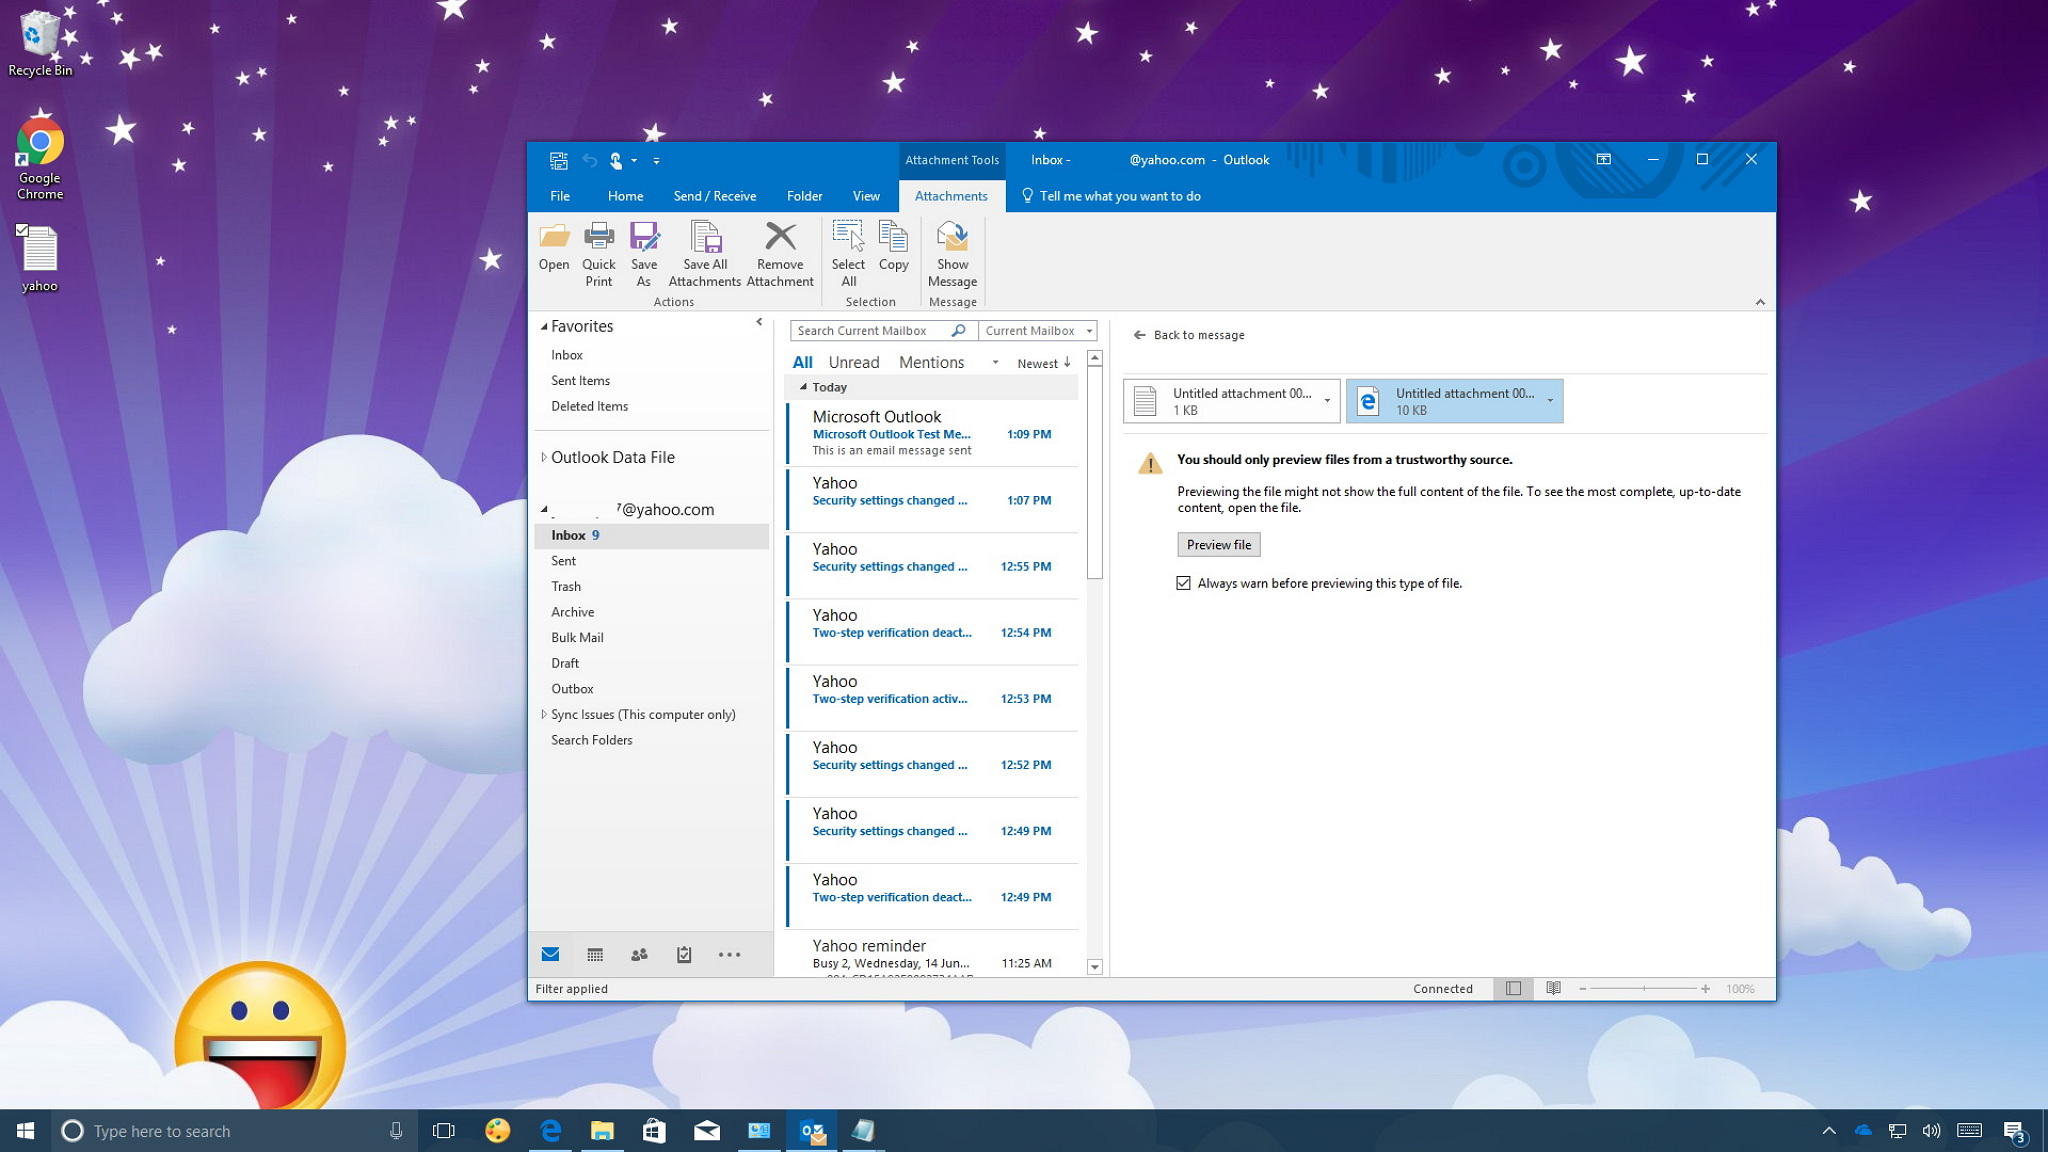 How To Configure A Yahoo Email Account On The Outlook 2016 Desktop